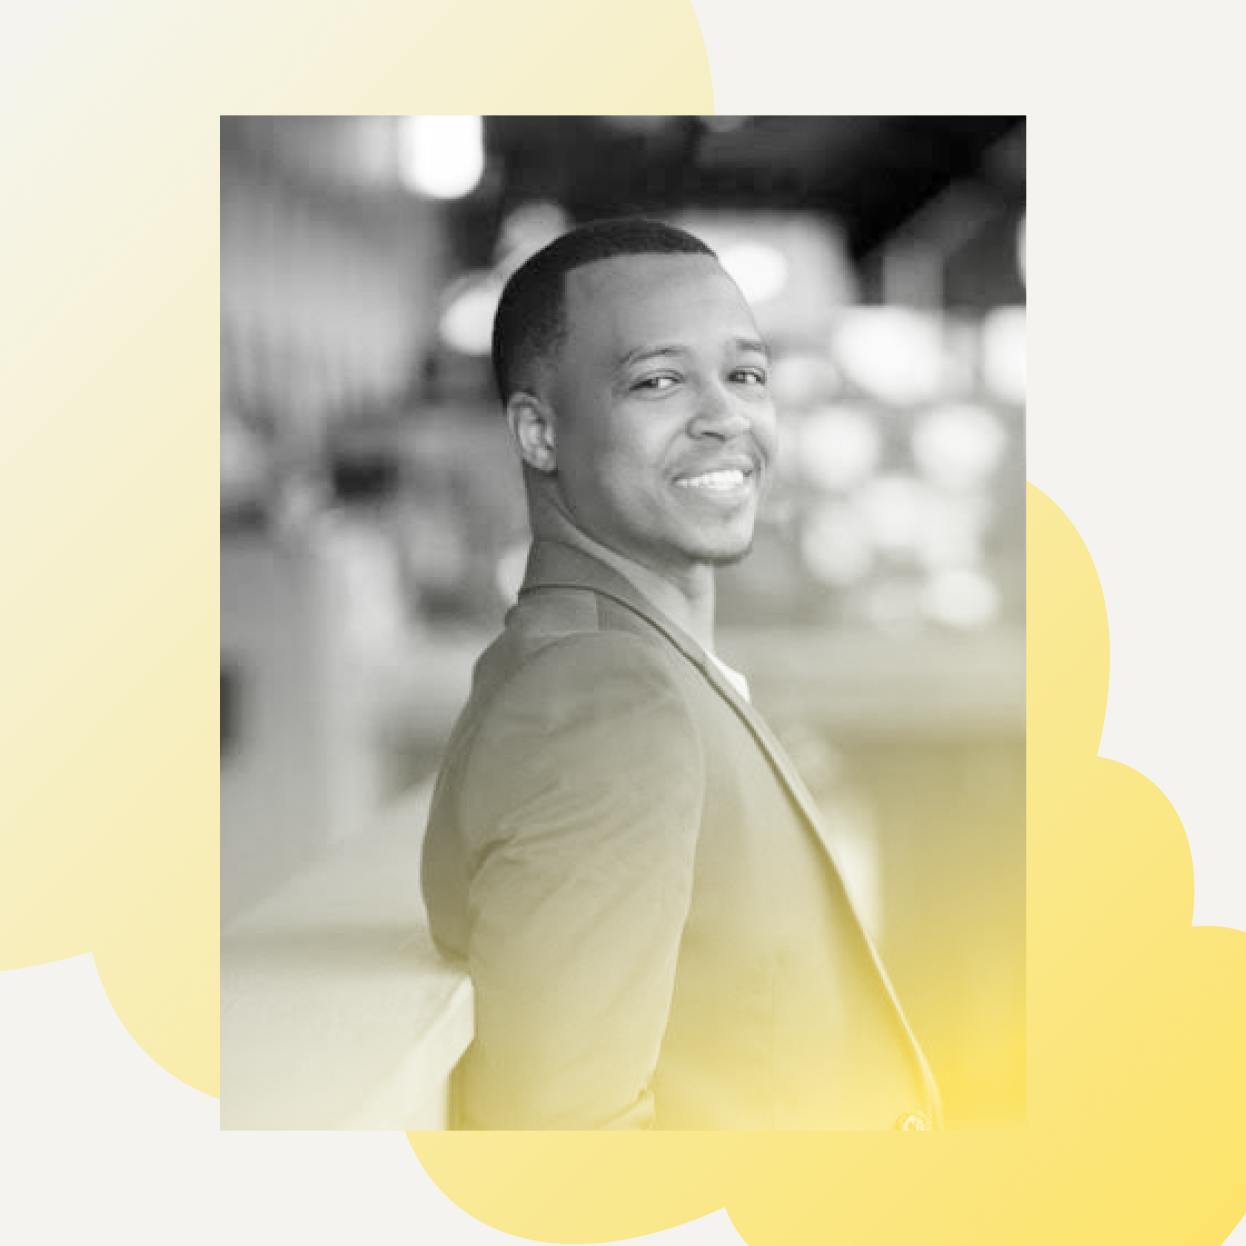 Khalif El-Amin teaches new founders about self-care